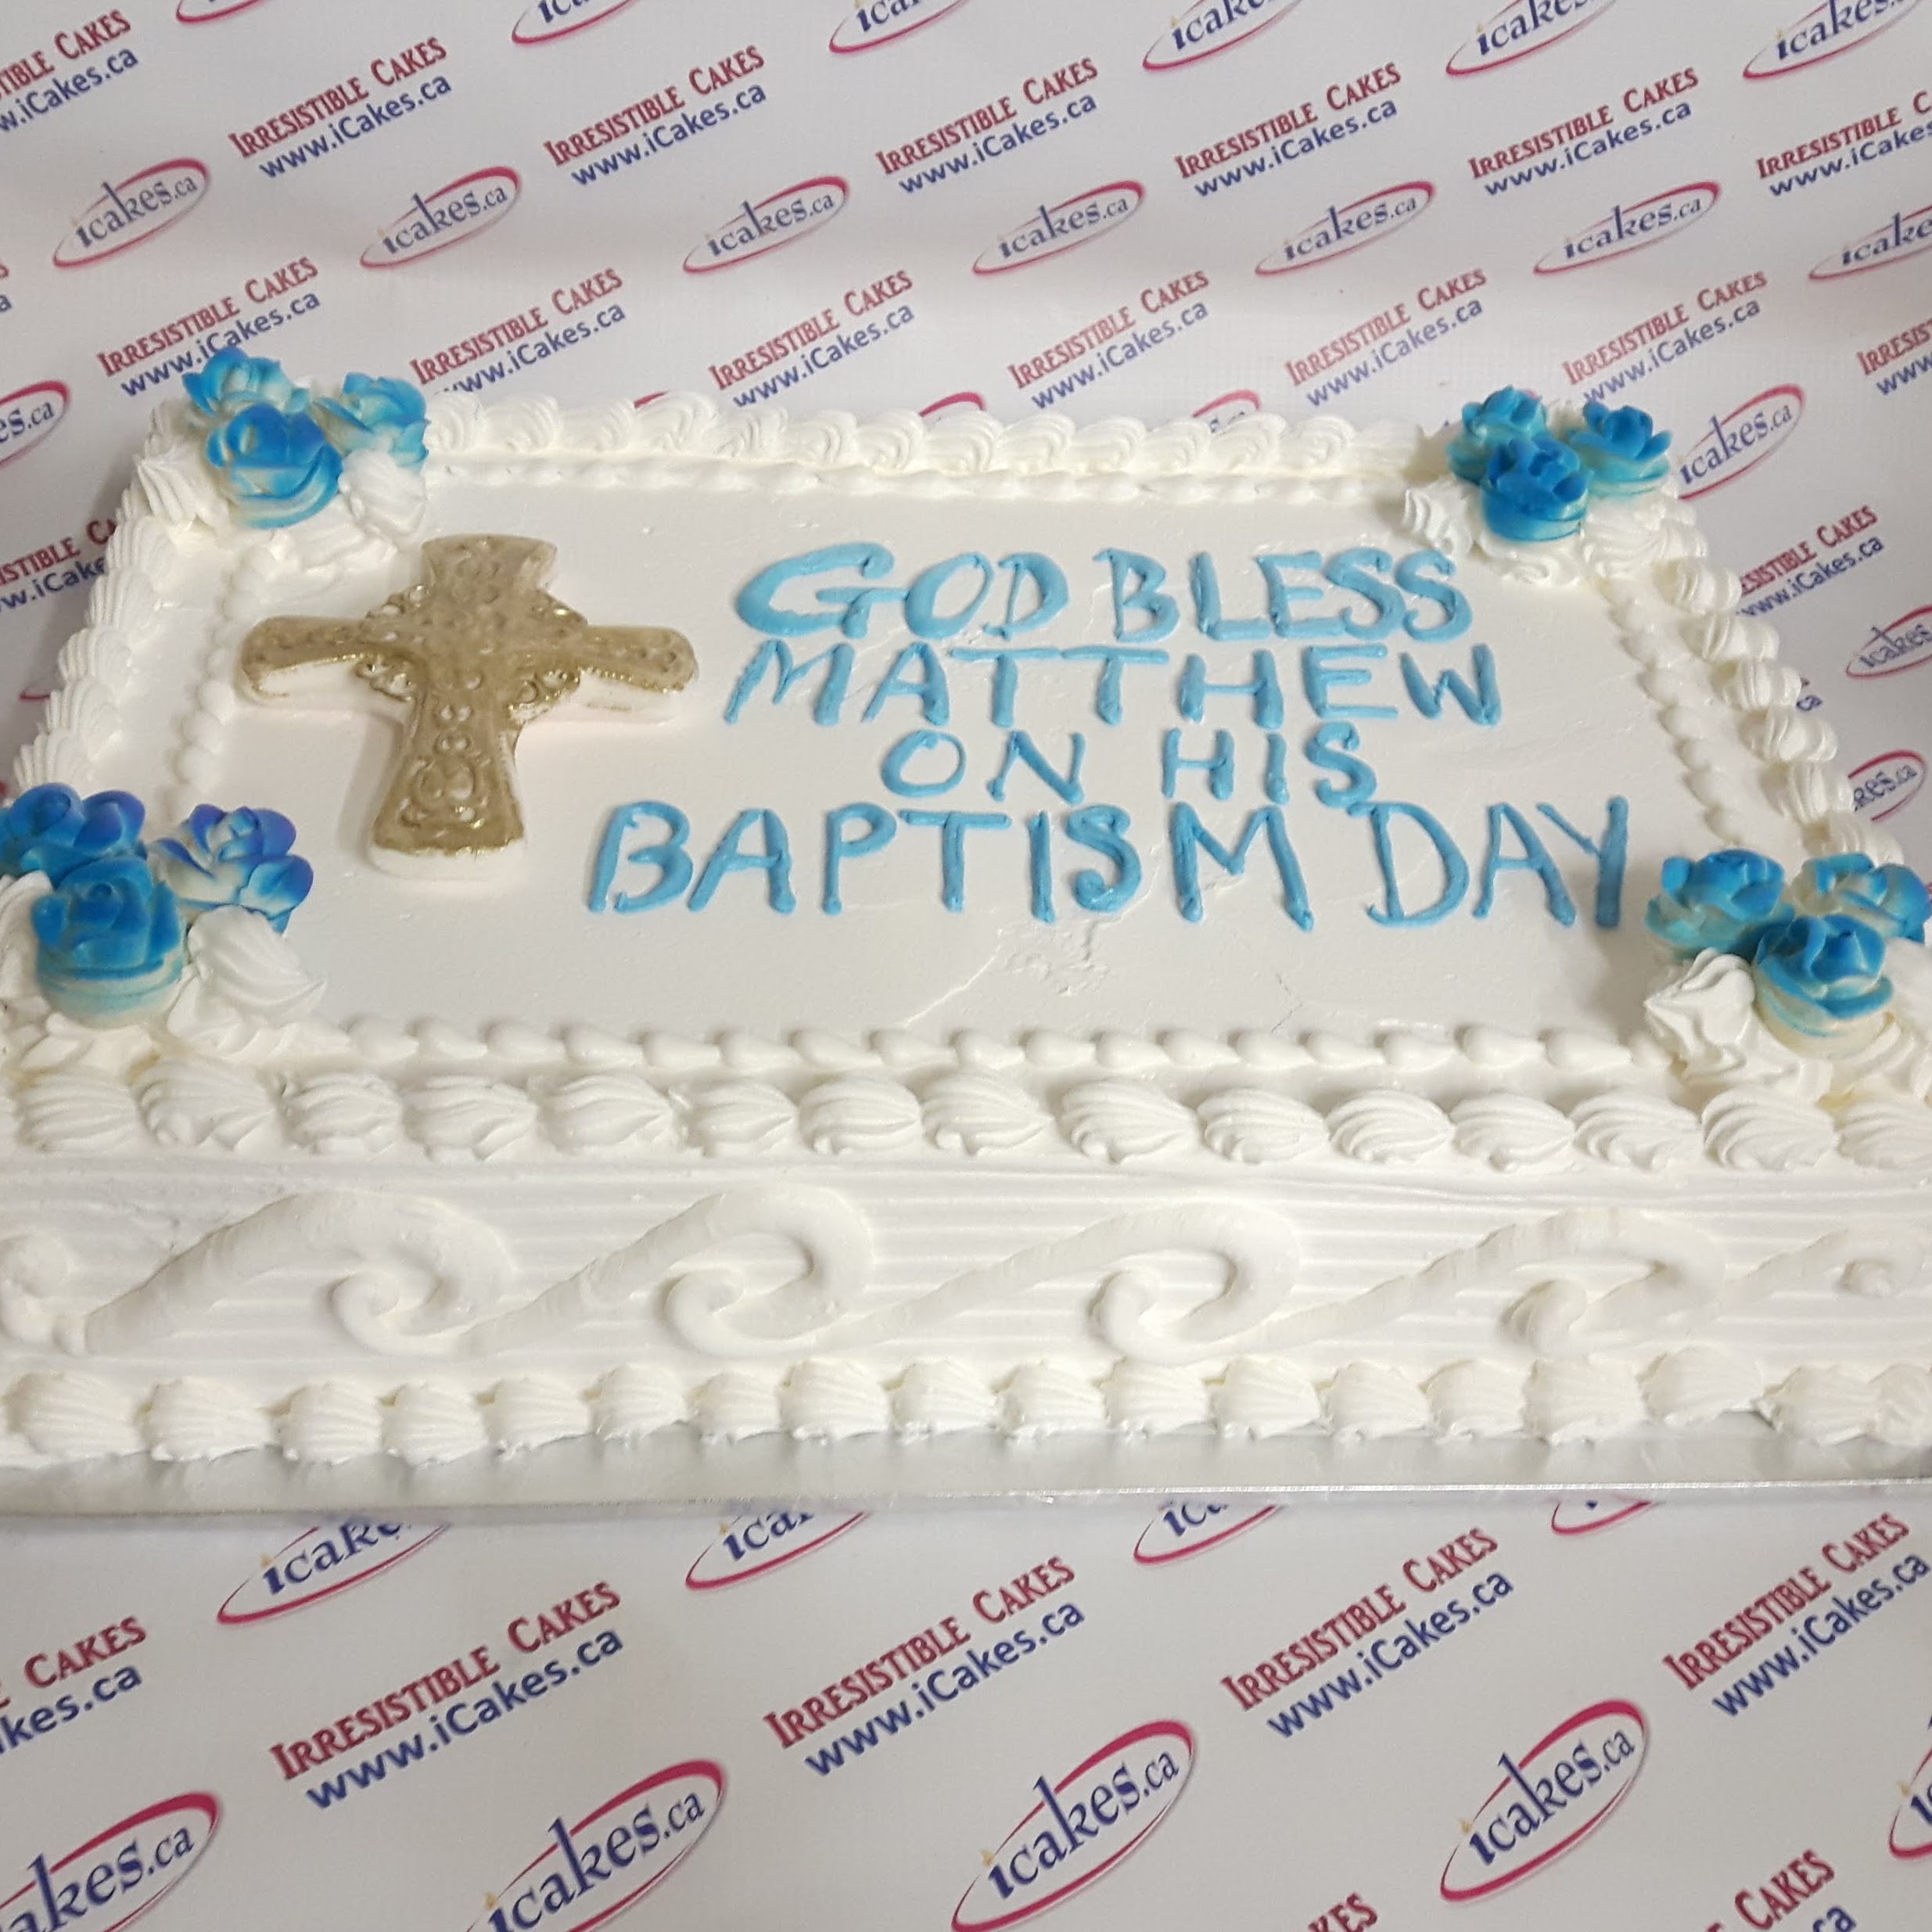 Baptism, Communion or Confirmation Sugar Roses Slab Buttercream Religious Cake from Irresistible Cakes Vaughan